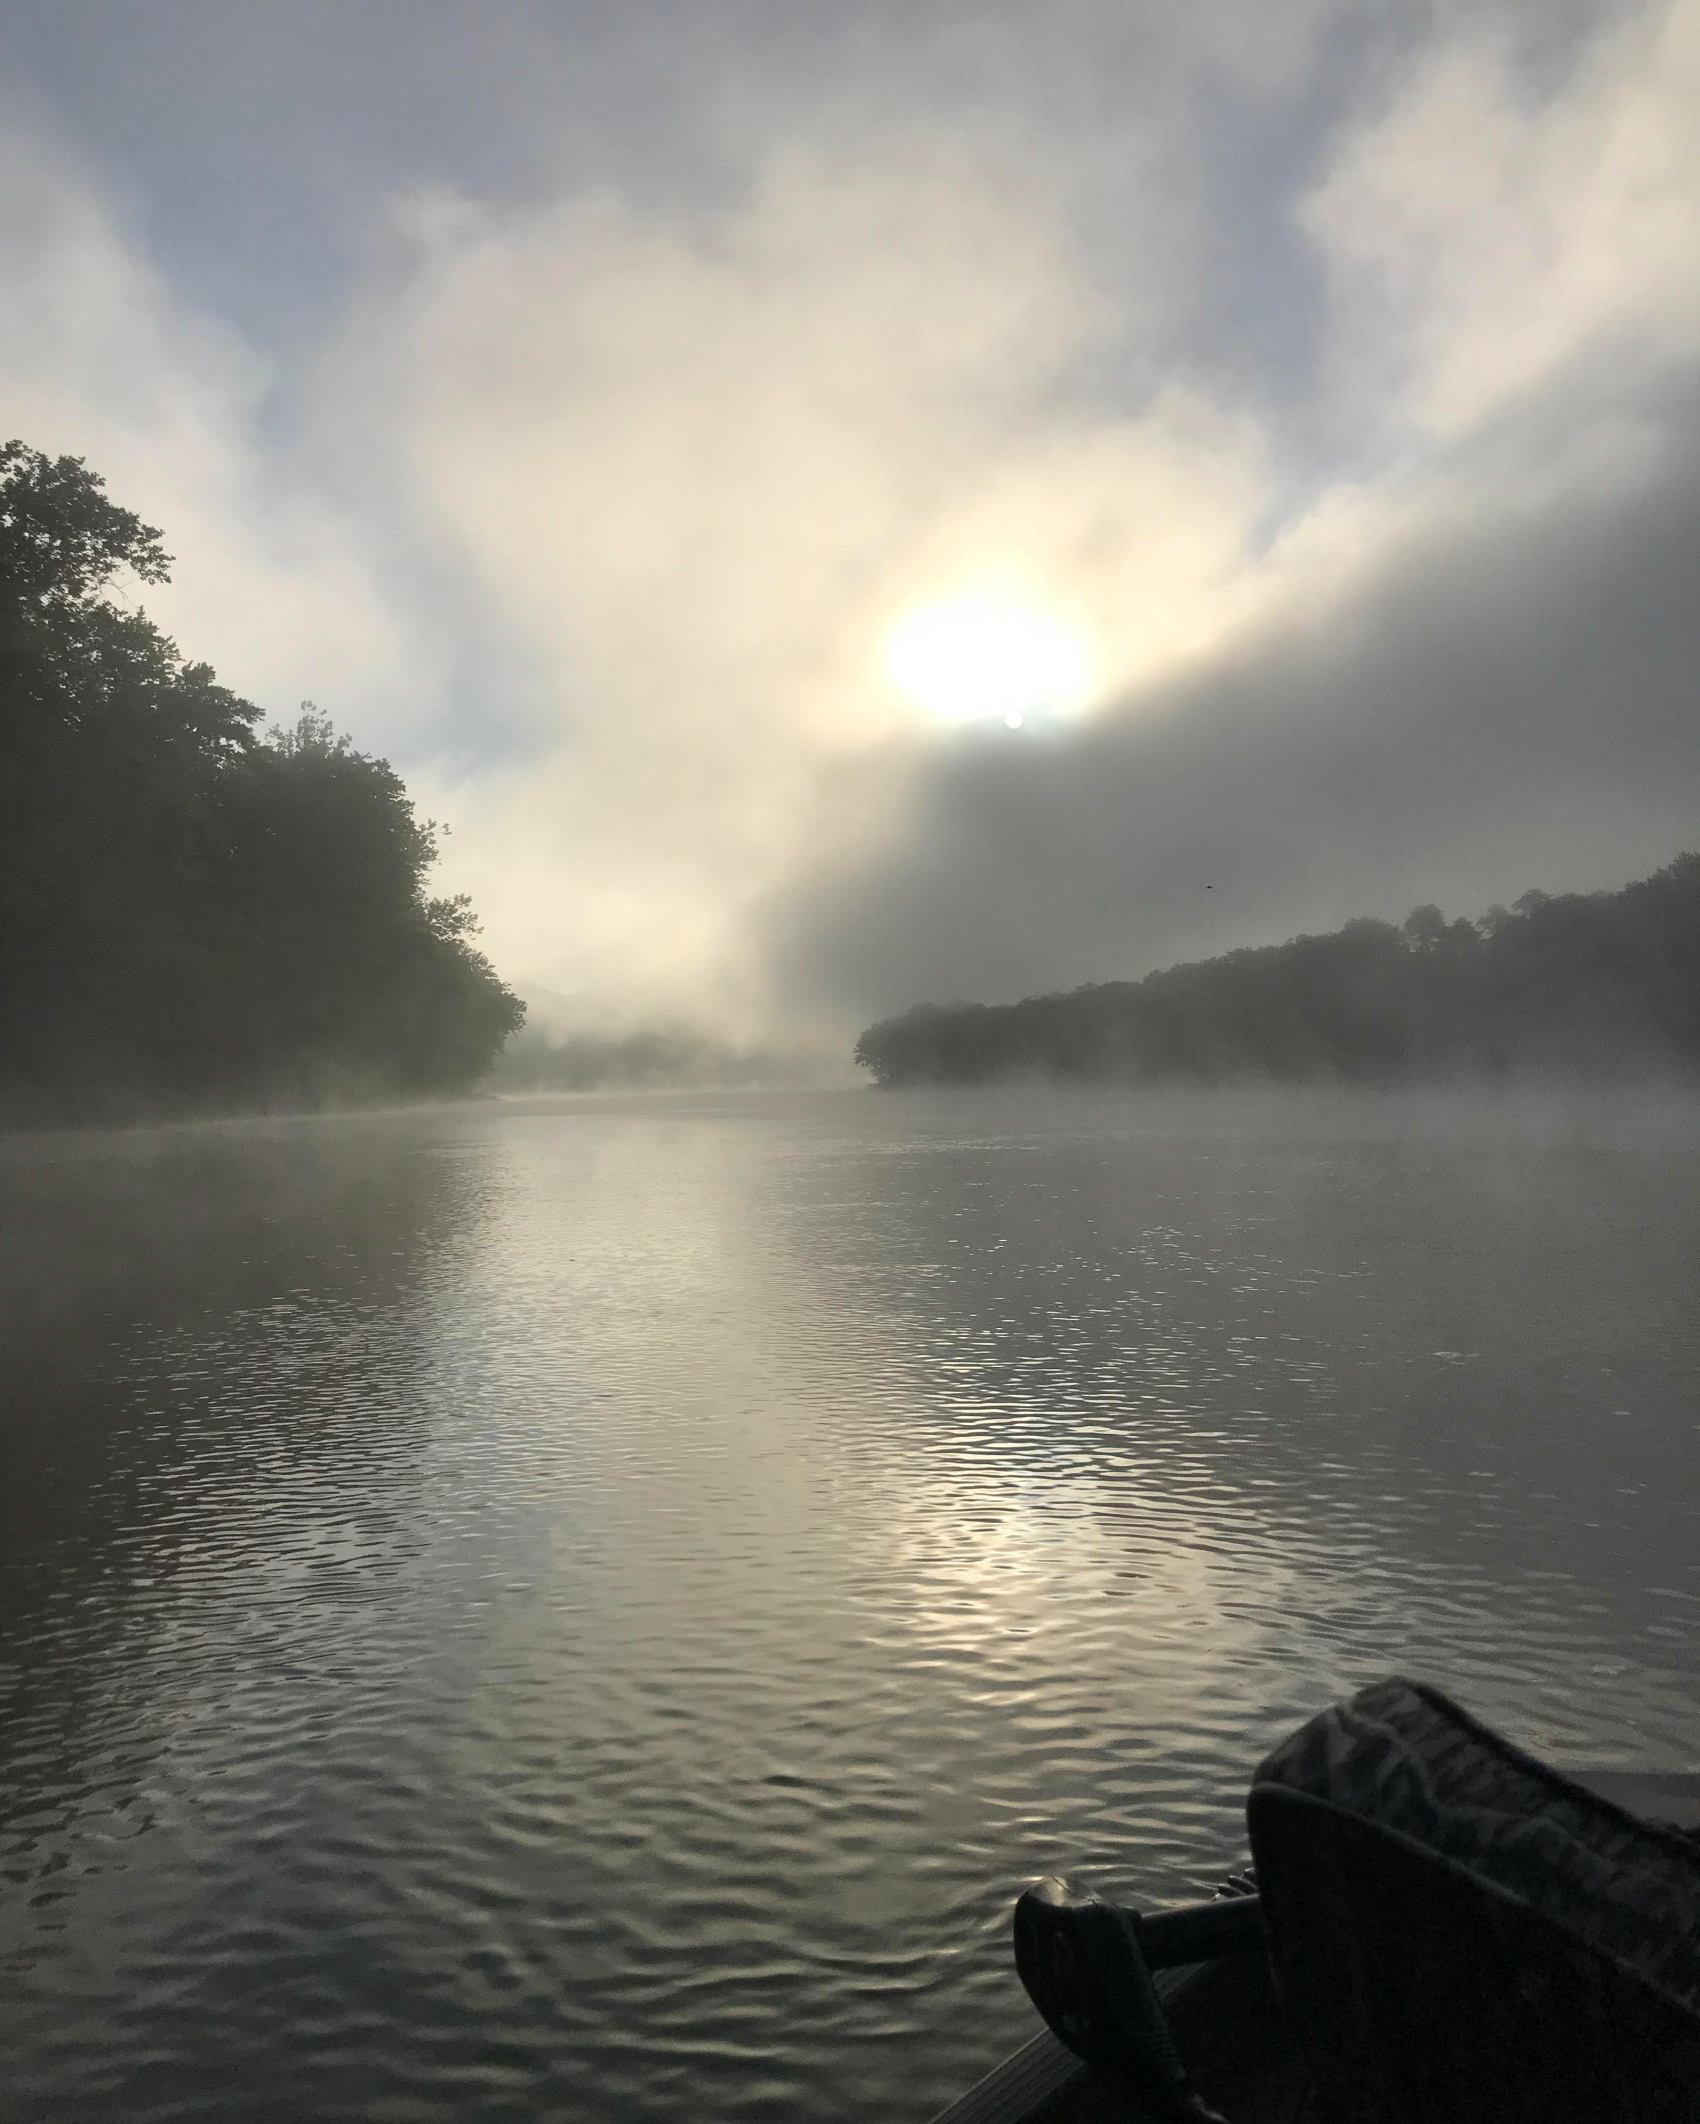 The Susquehanna River in the early morning with fog floating low over the water